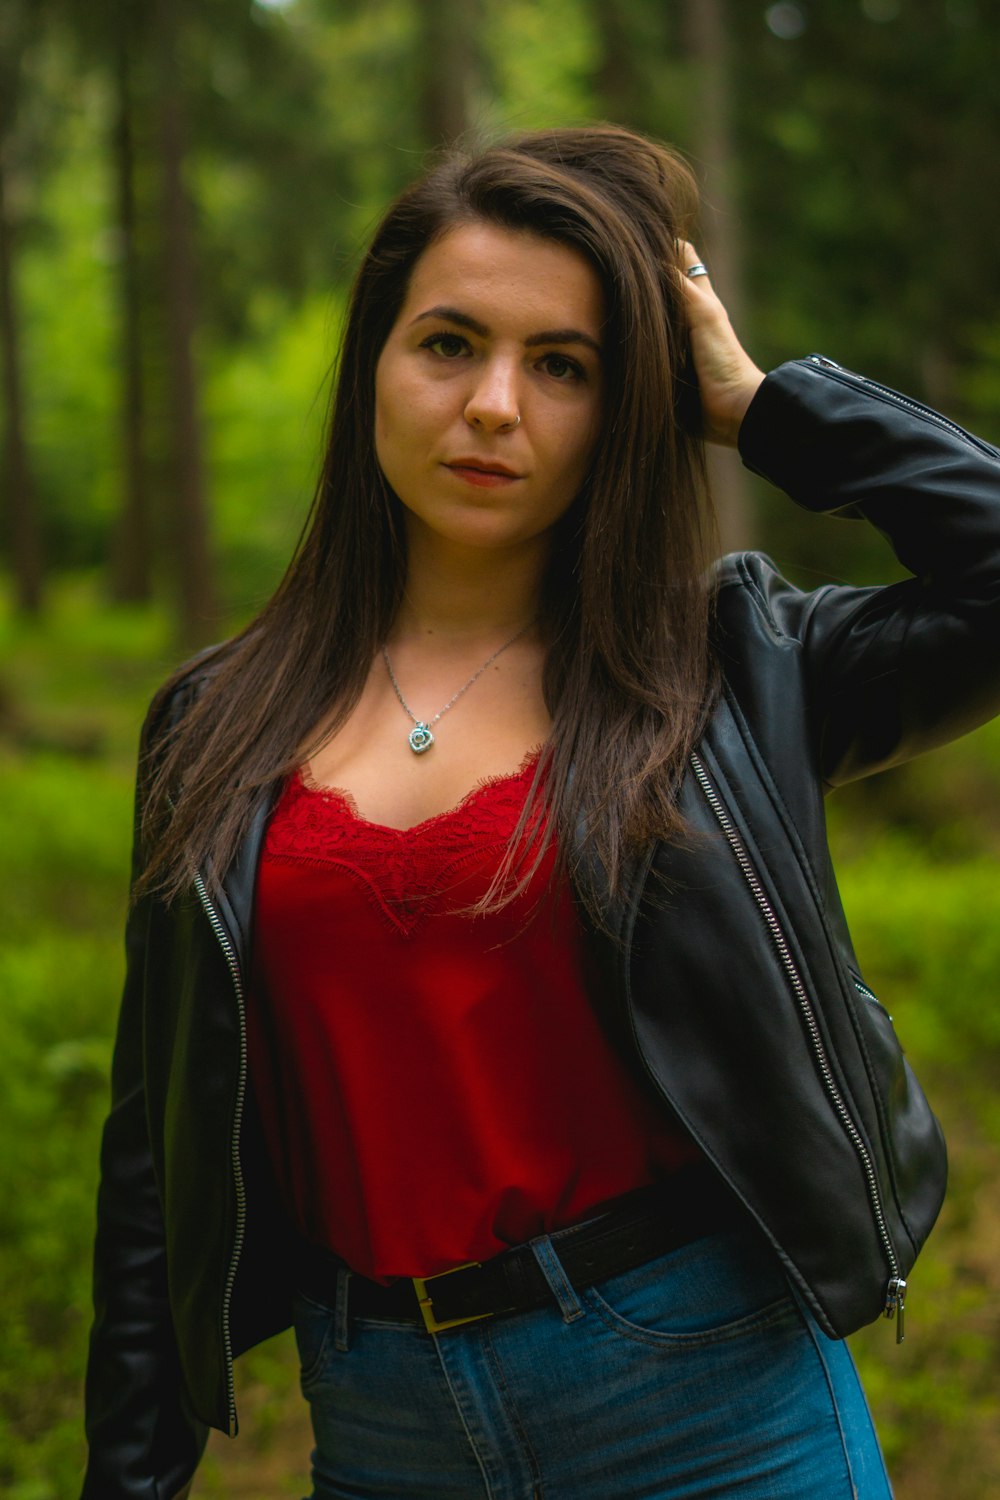 Woman in black leather jacket and red top photo – Free Clothing Image on  Unsplash